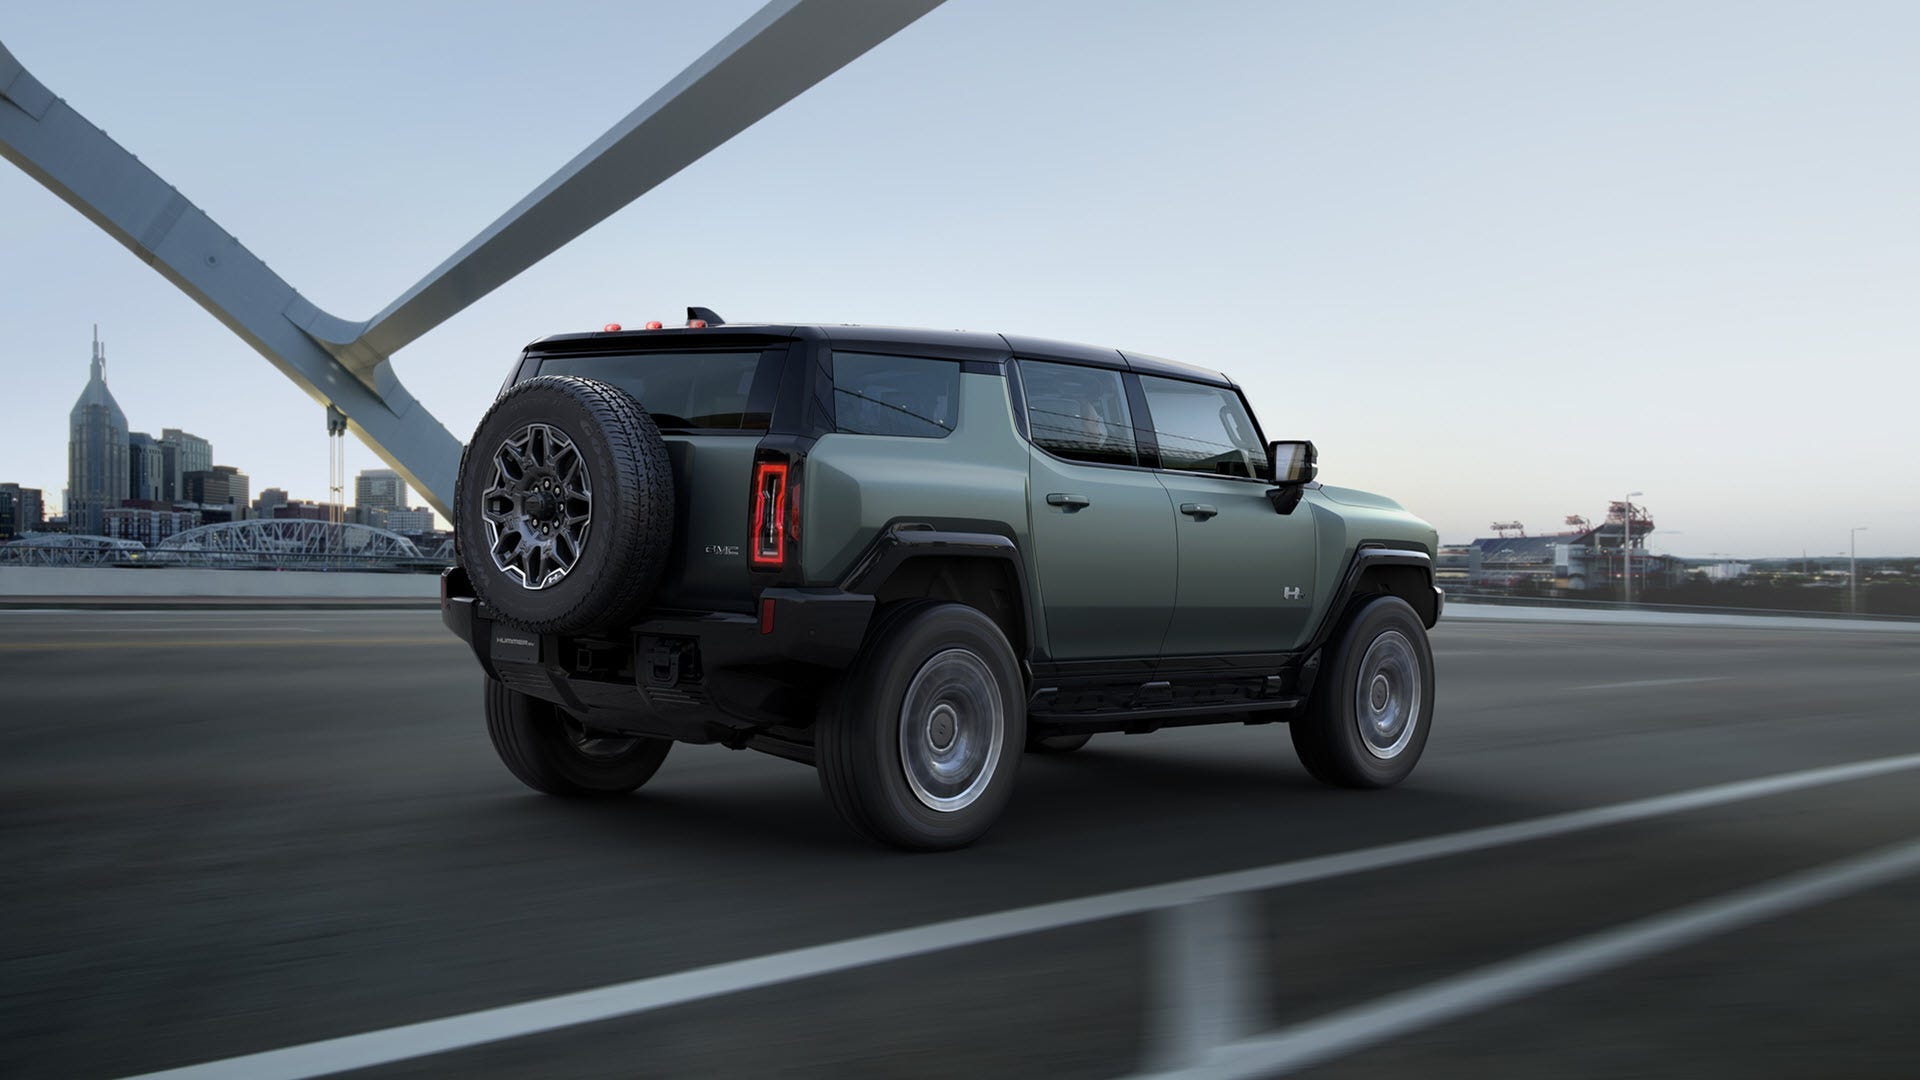 The New Hummer SUV EV Actually Looks Like a Hummer, Starts at $000